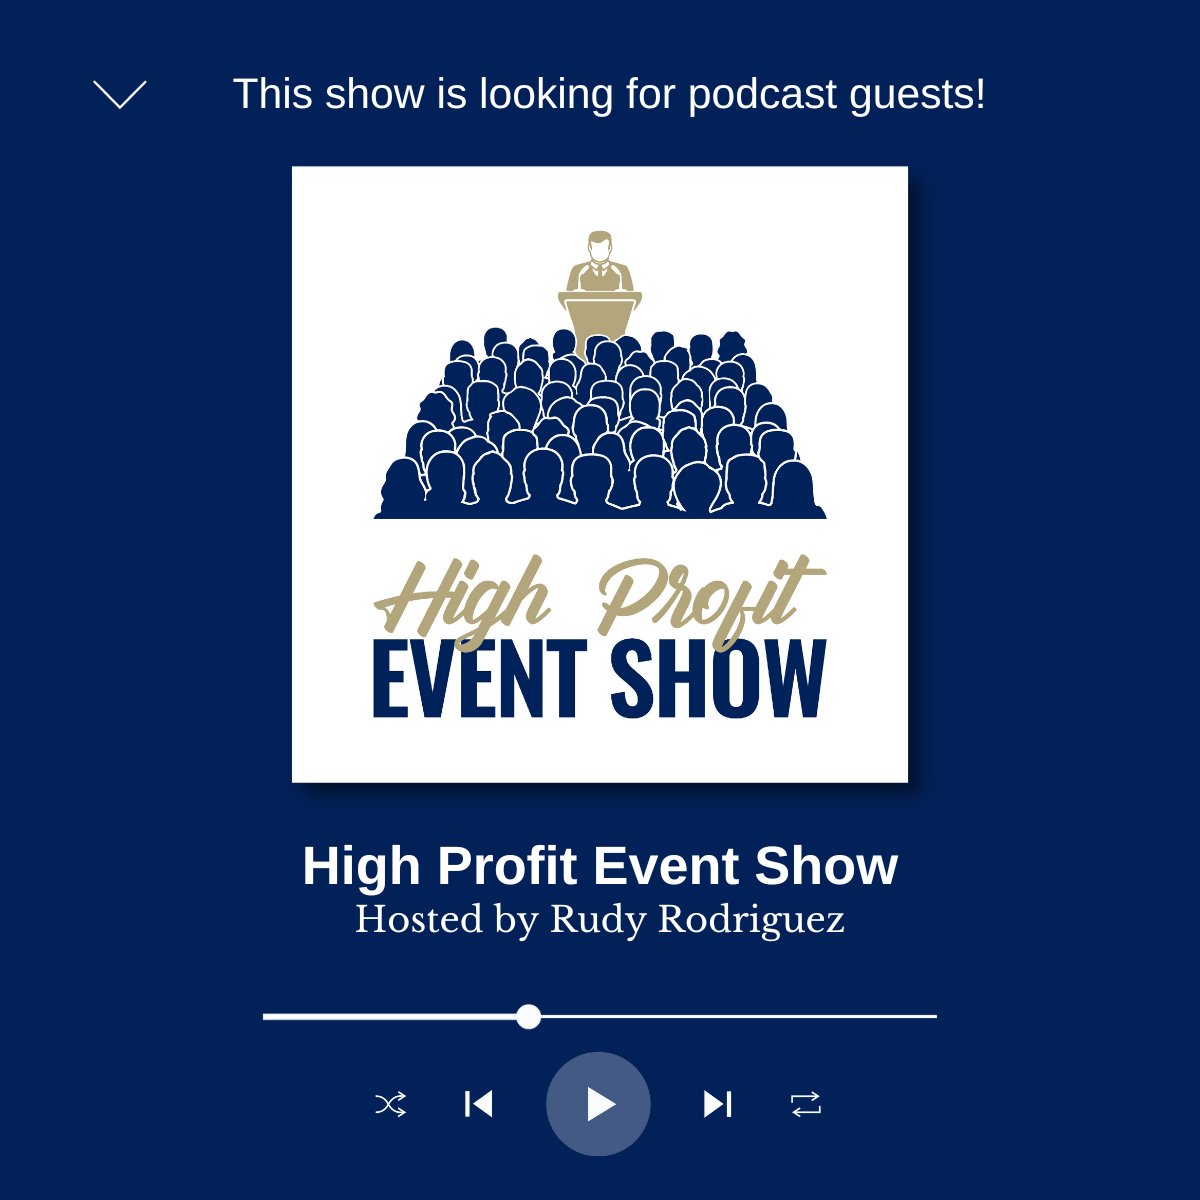 The High Profit Event Show Podcast hosted by Rudy Rodriguez is looking for entrepreneurs with experience in hosting events that brought in clients and would love to have them on the show! Apply here: go.virtualeventsalesteam.com/podcast-guest #podcastshow #events #eventmanagement #journorequest